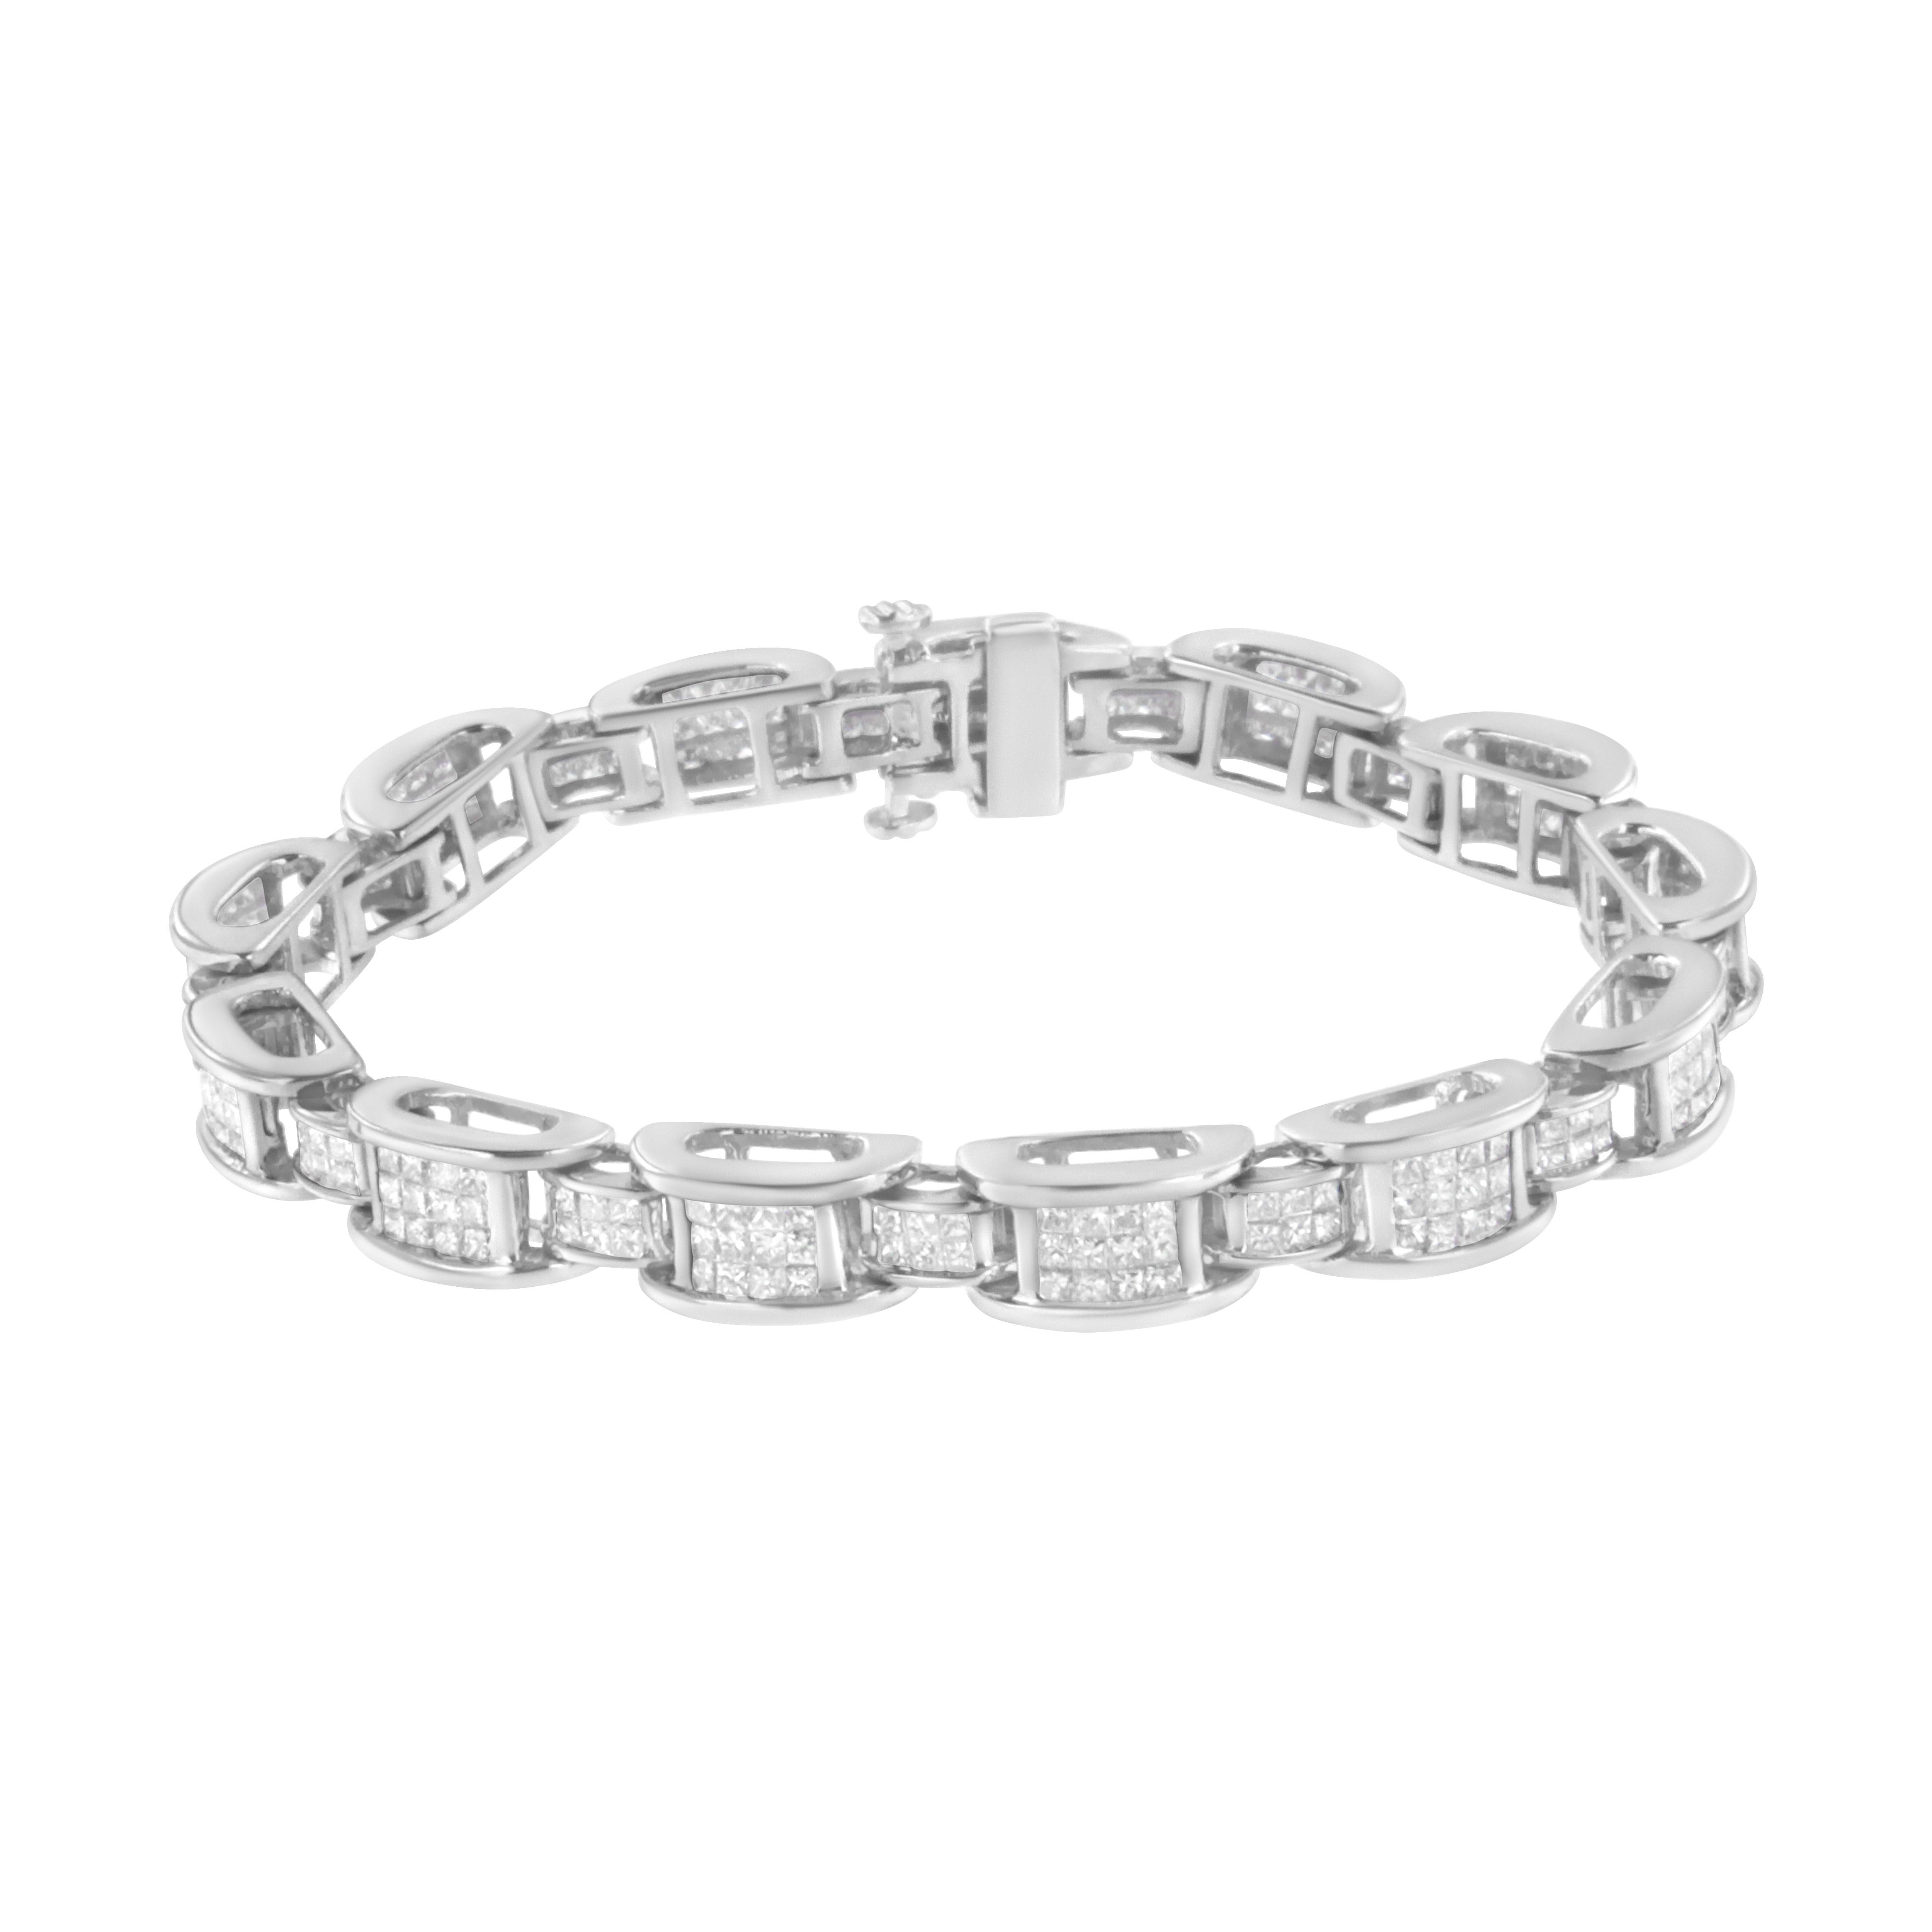 A must have for any serious jewelry collection, this stunning 14K white gold tennis bracelet boasts an impressive 5.0 carat total weight of diamonds. The bracelet features D or bridge shaped links that alternate between large and small sizes both